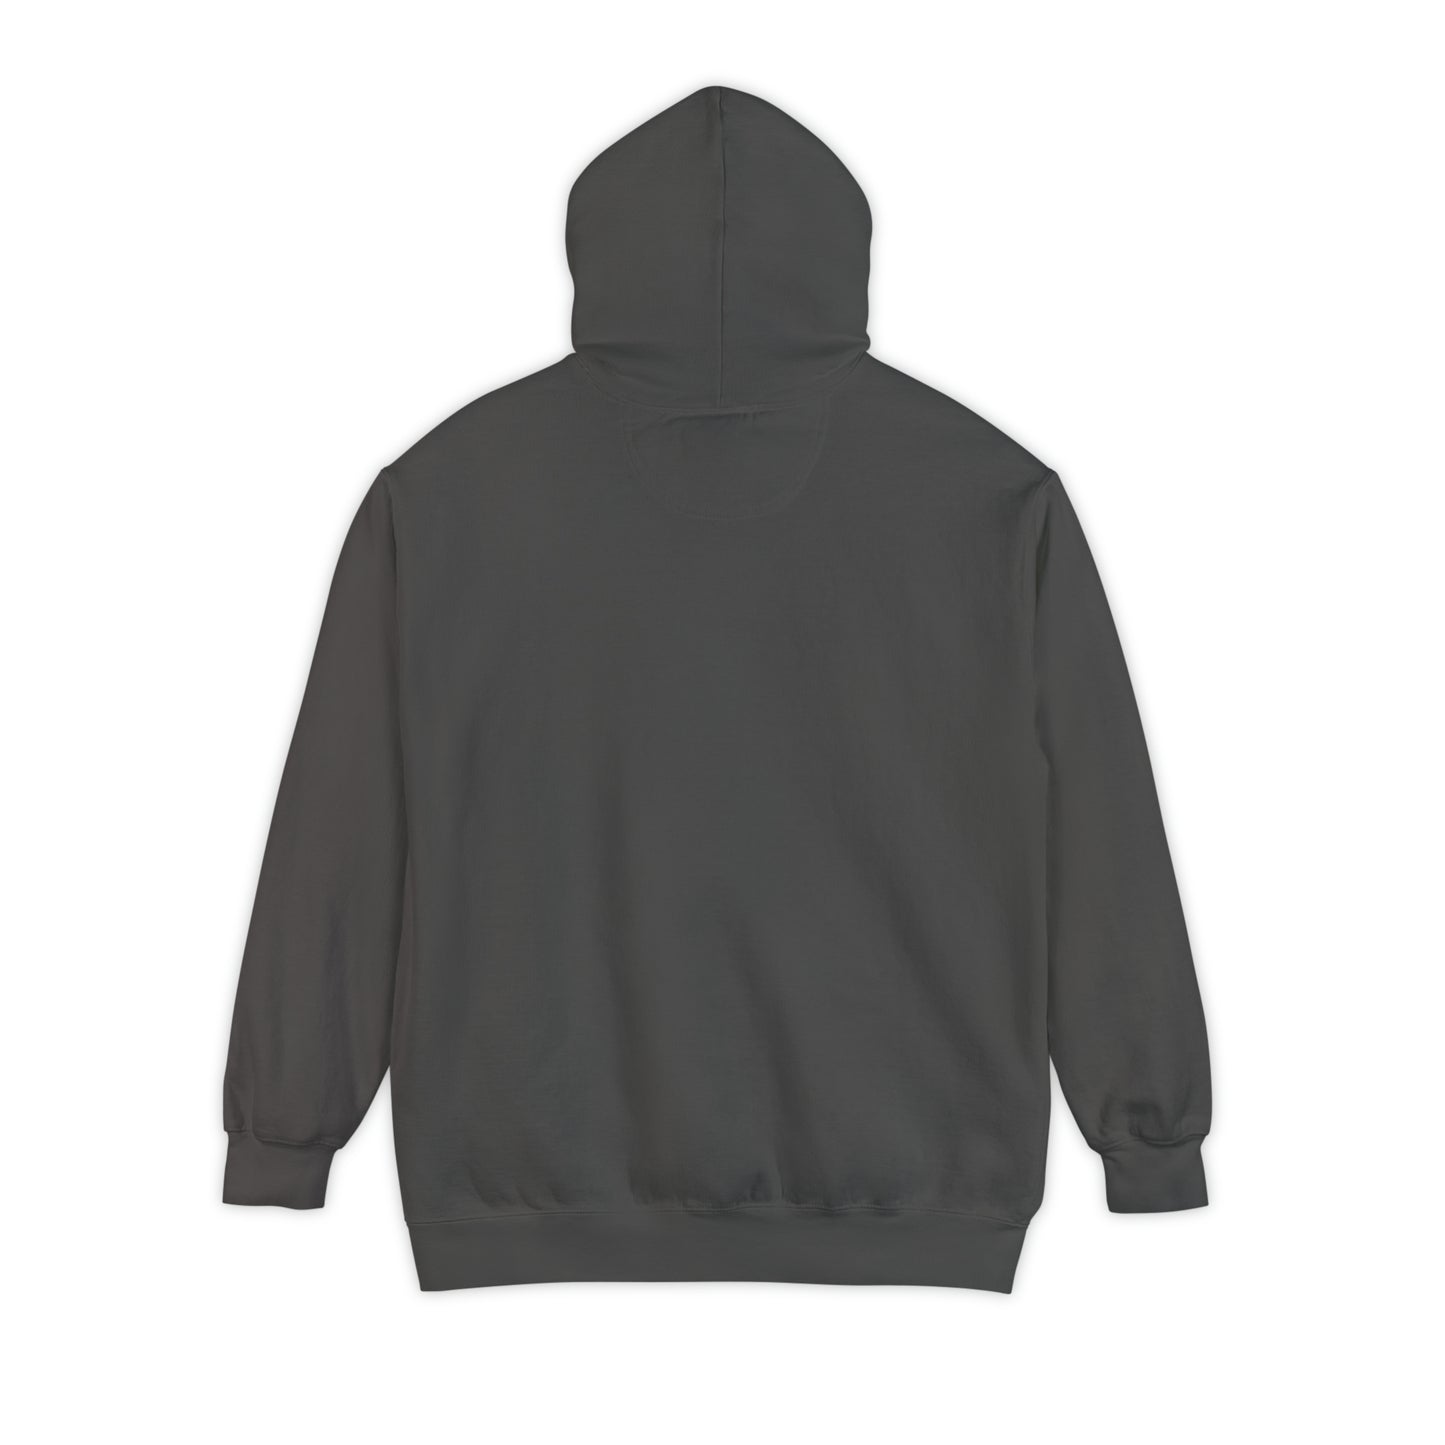 Lenny's 50th Anniversary Commemorative Heavyweight Garment-Dyed Hoodie